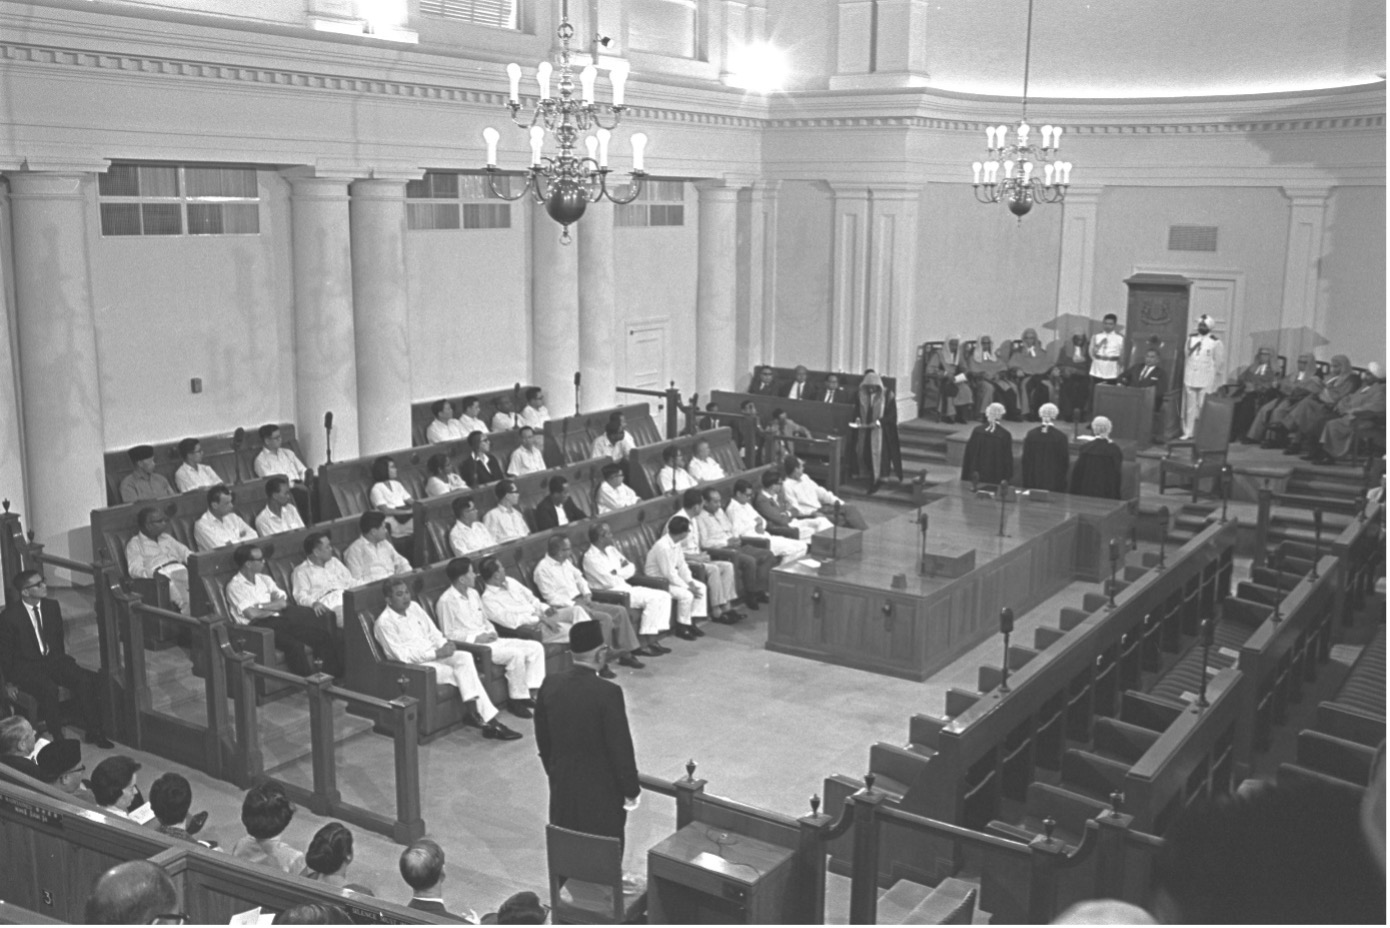 Opening of first parliament